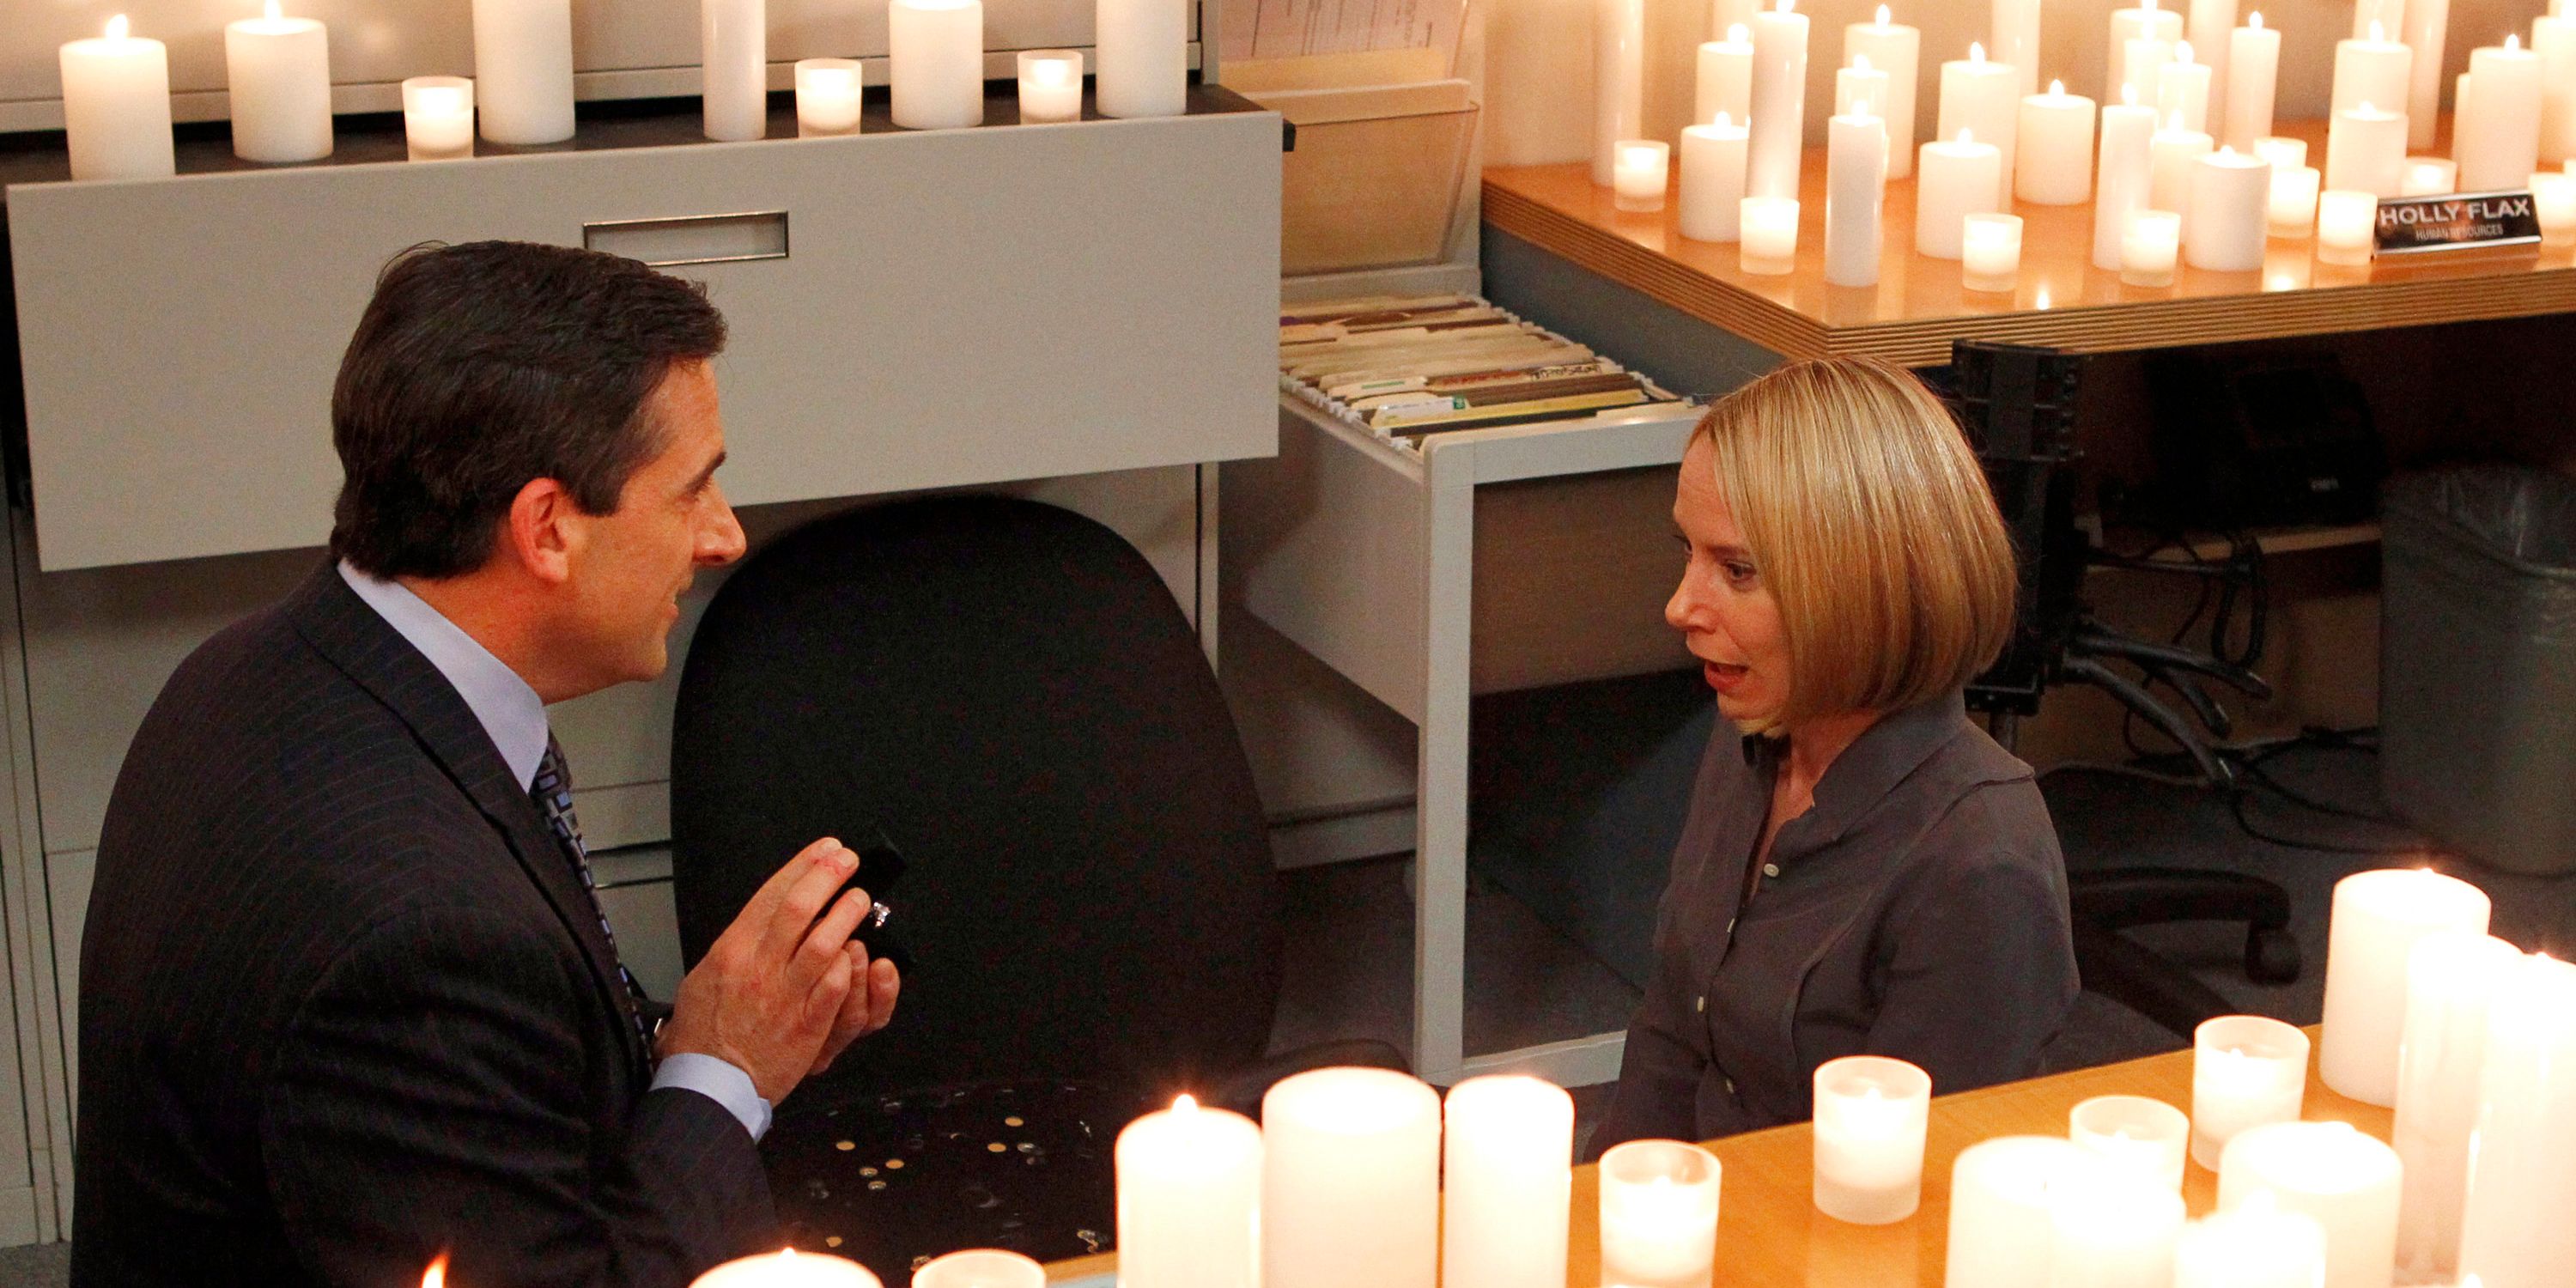 Michael proposing to Holly surrounded by candles in The Office 